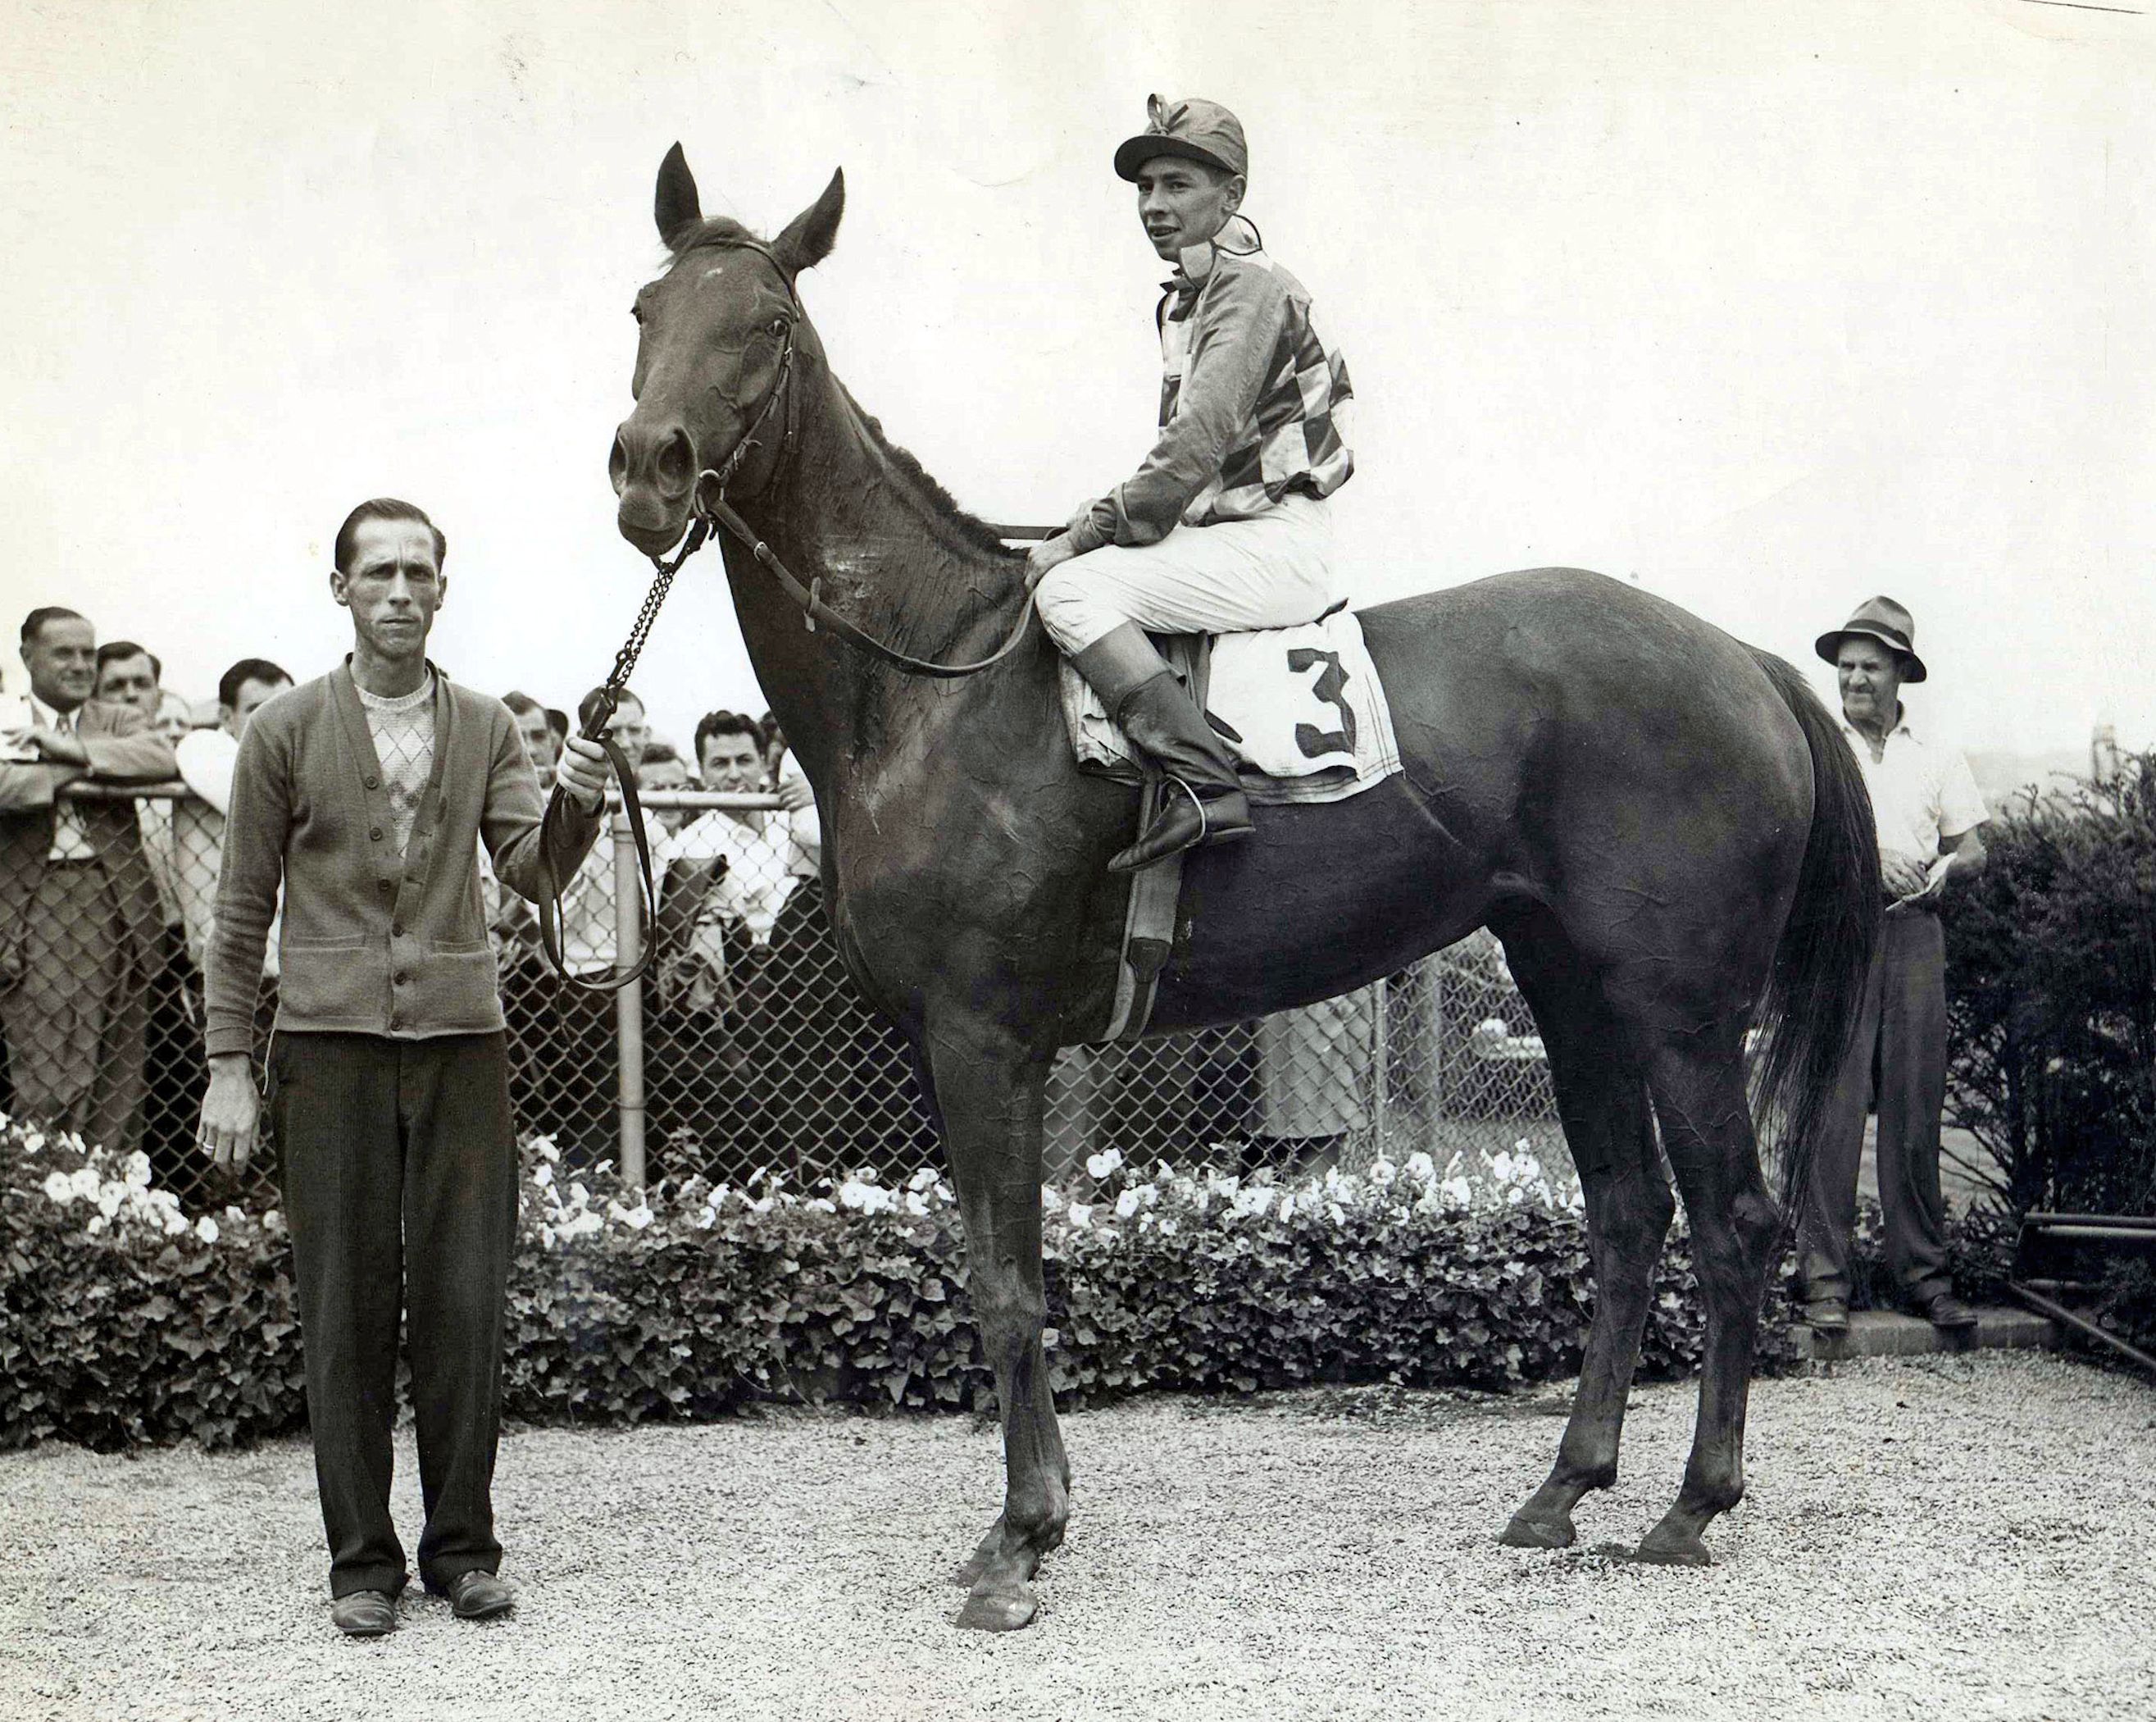 Gallorette with Job D. Jessop up in the winner's circle, undated (Bert Morgan/Museum Collection)